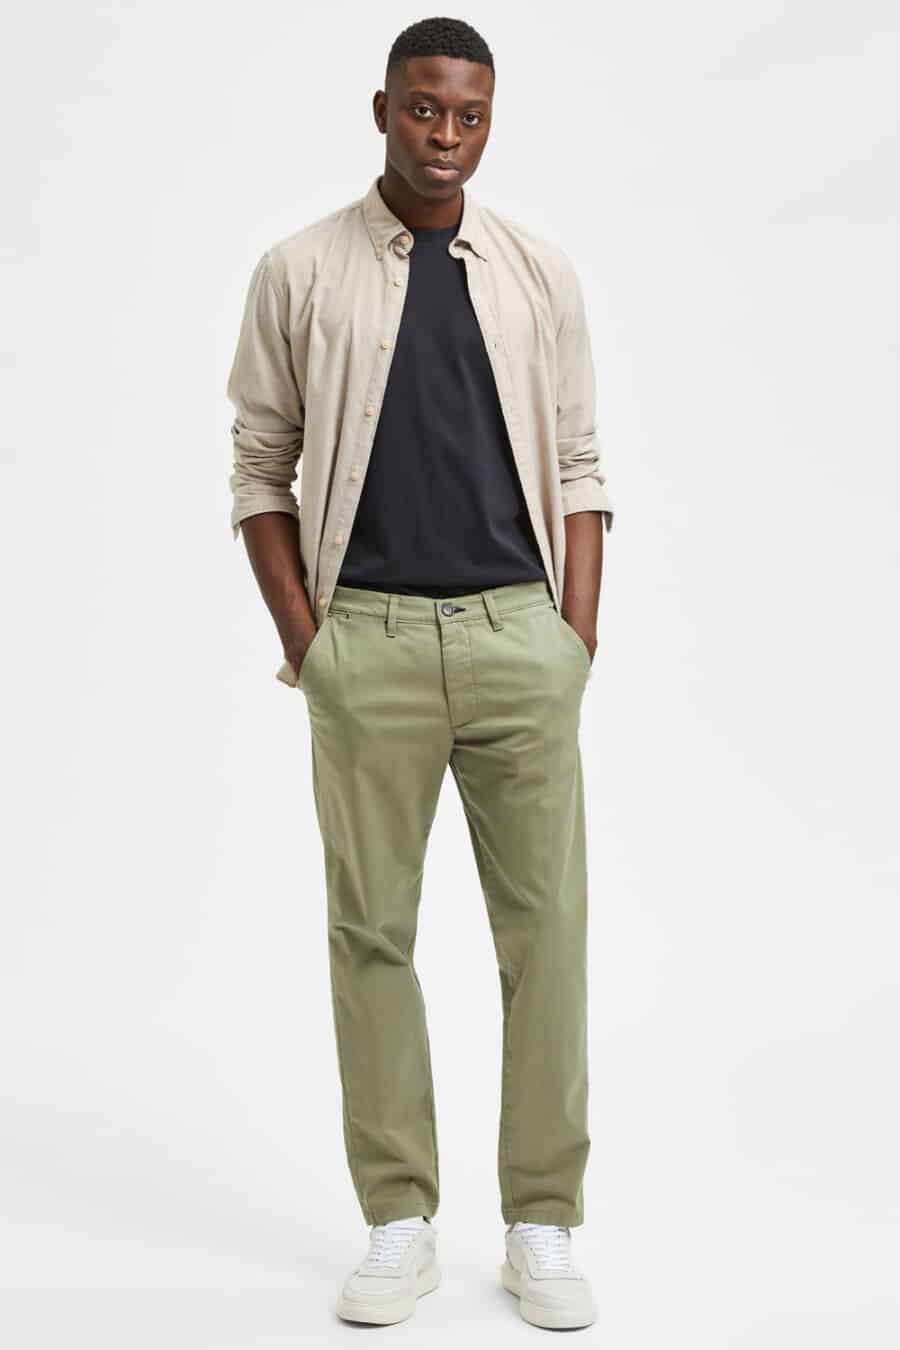 Men's light grene chino pants, navy T-shirt, light brown Oxford shirt and off-white sneakers outfit